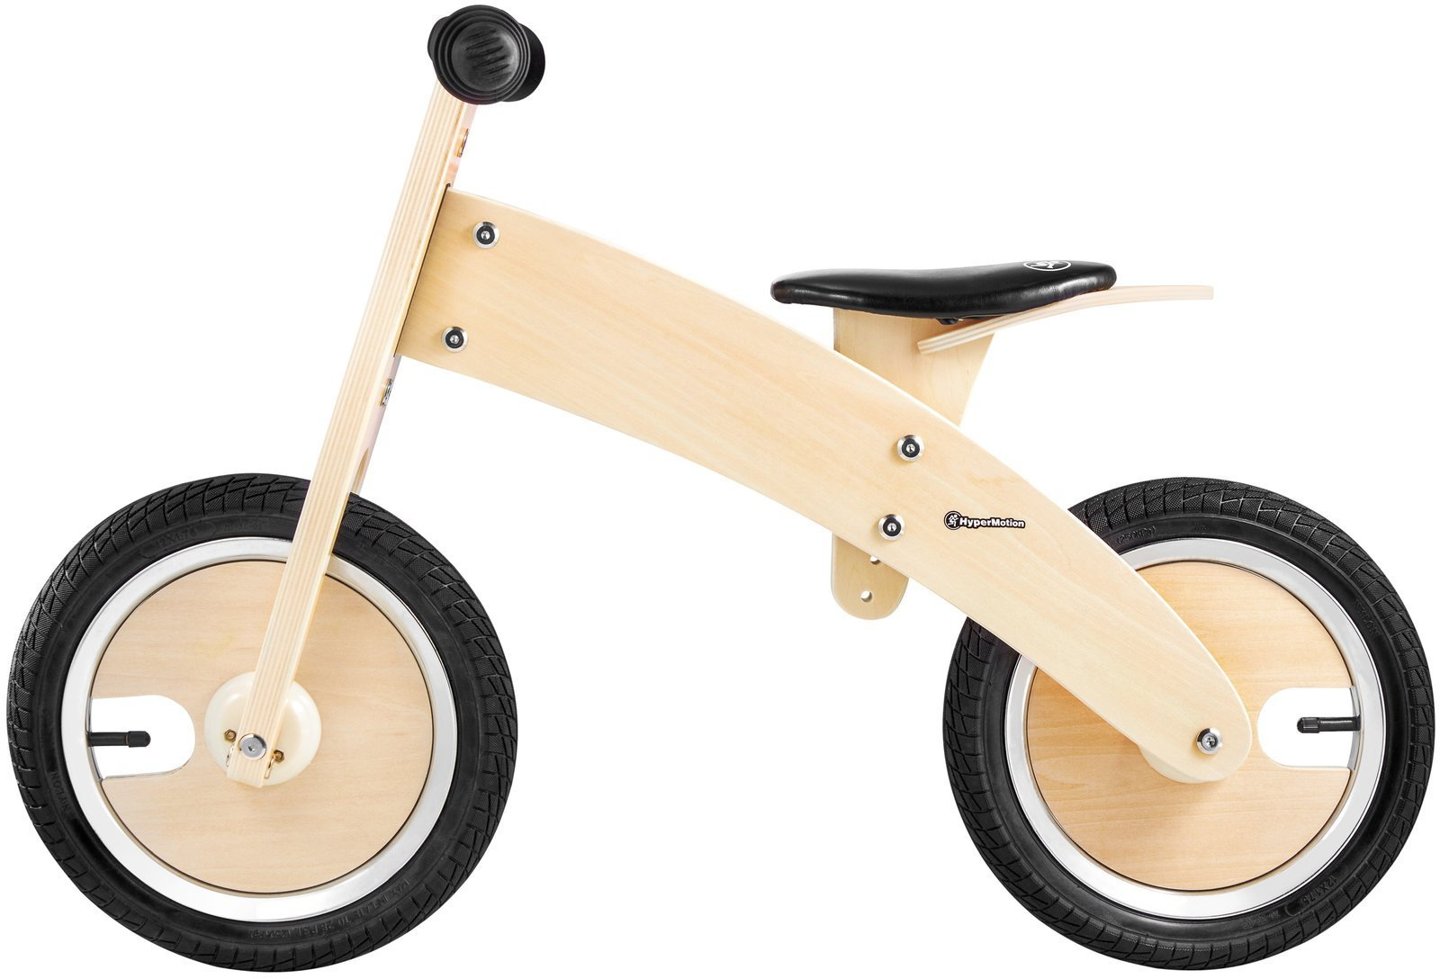 JAMES HyperMotion Wooden Balance Bike - inflatable wheels - natural